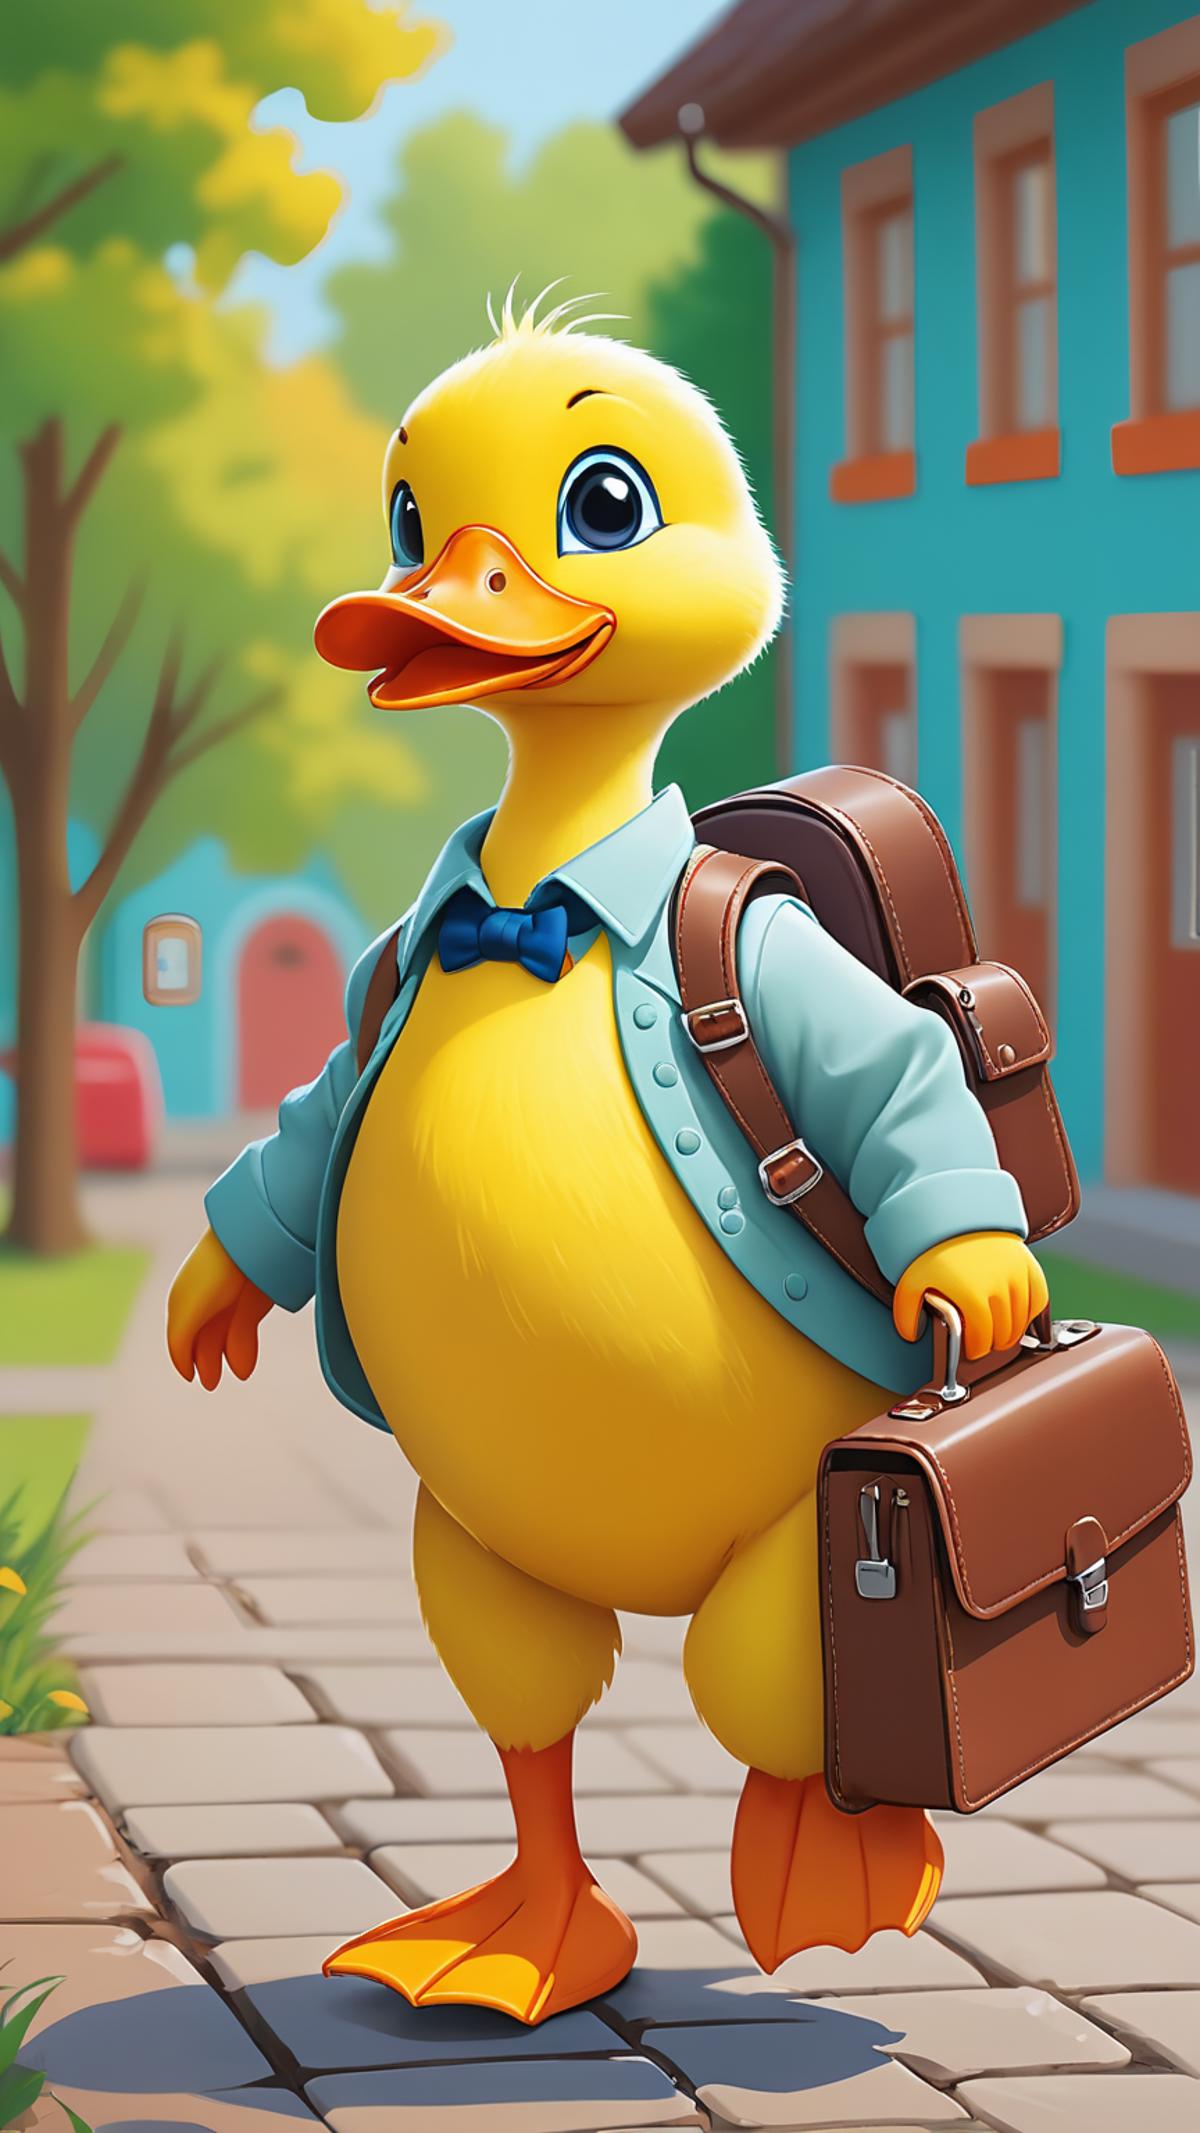 Cartoon Duck Character with Suitcase and Backpack on Sidewalk.